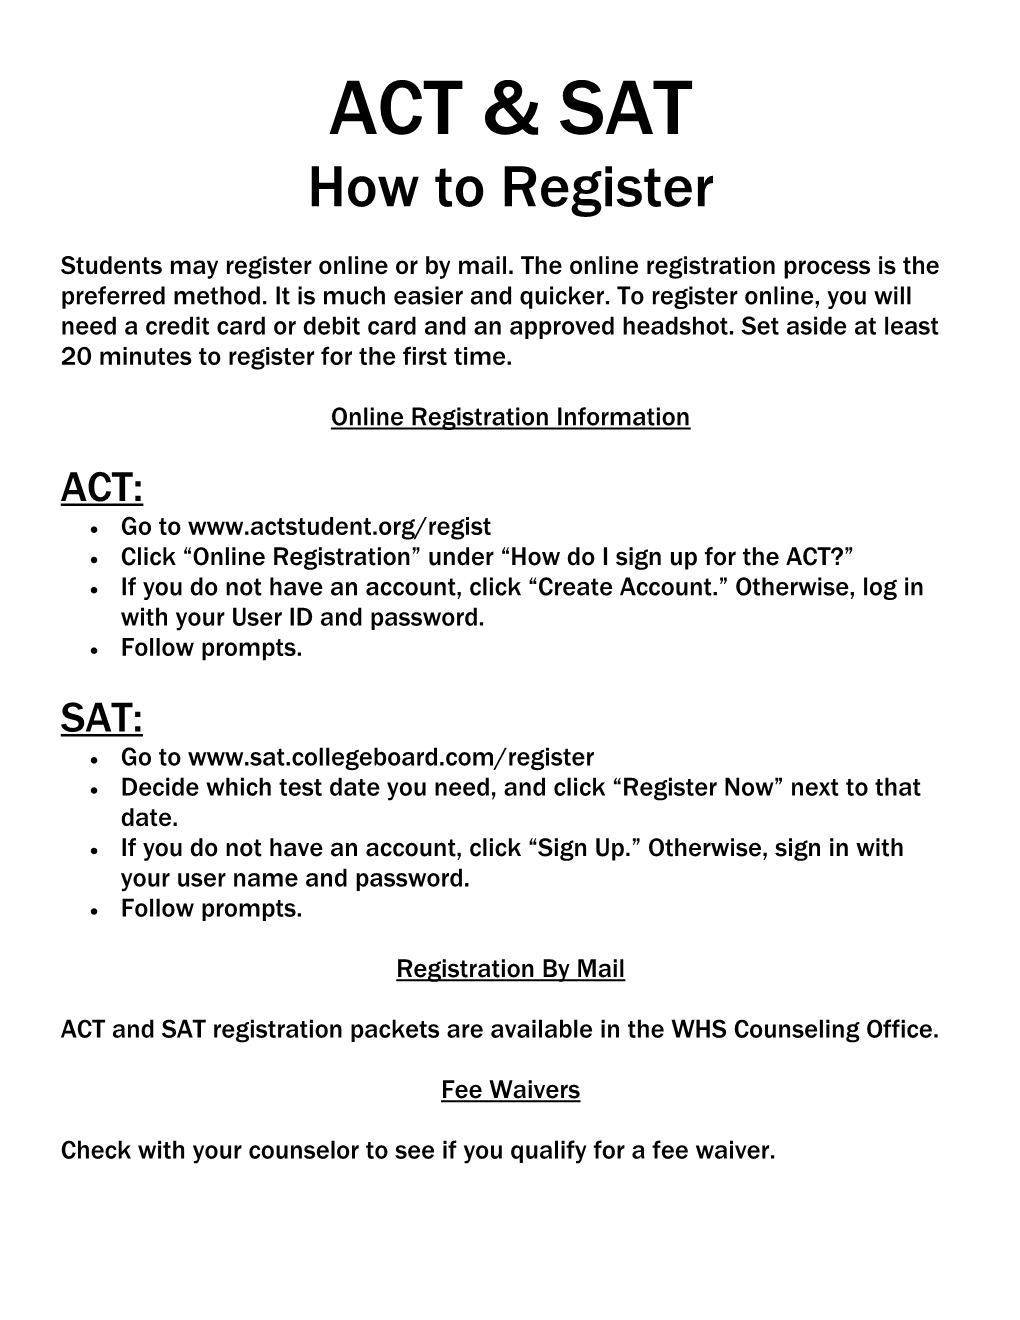 Click Online Registration Under How Do I Sign up for the ACT?